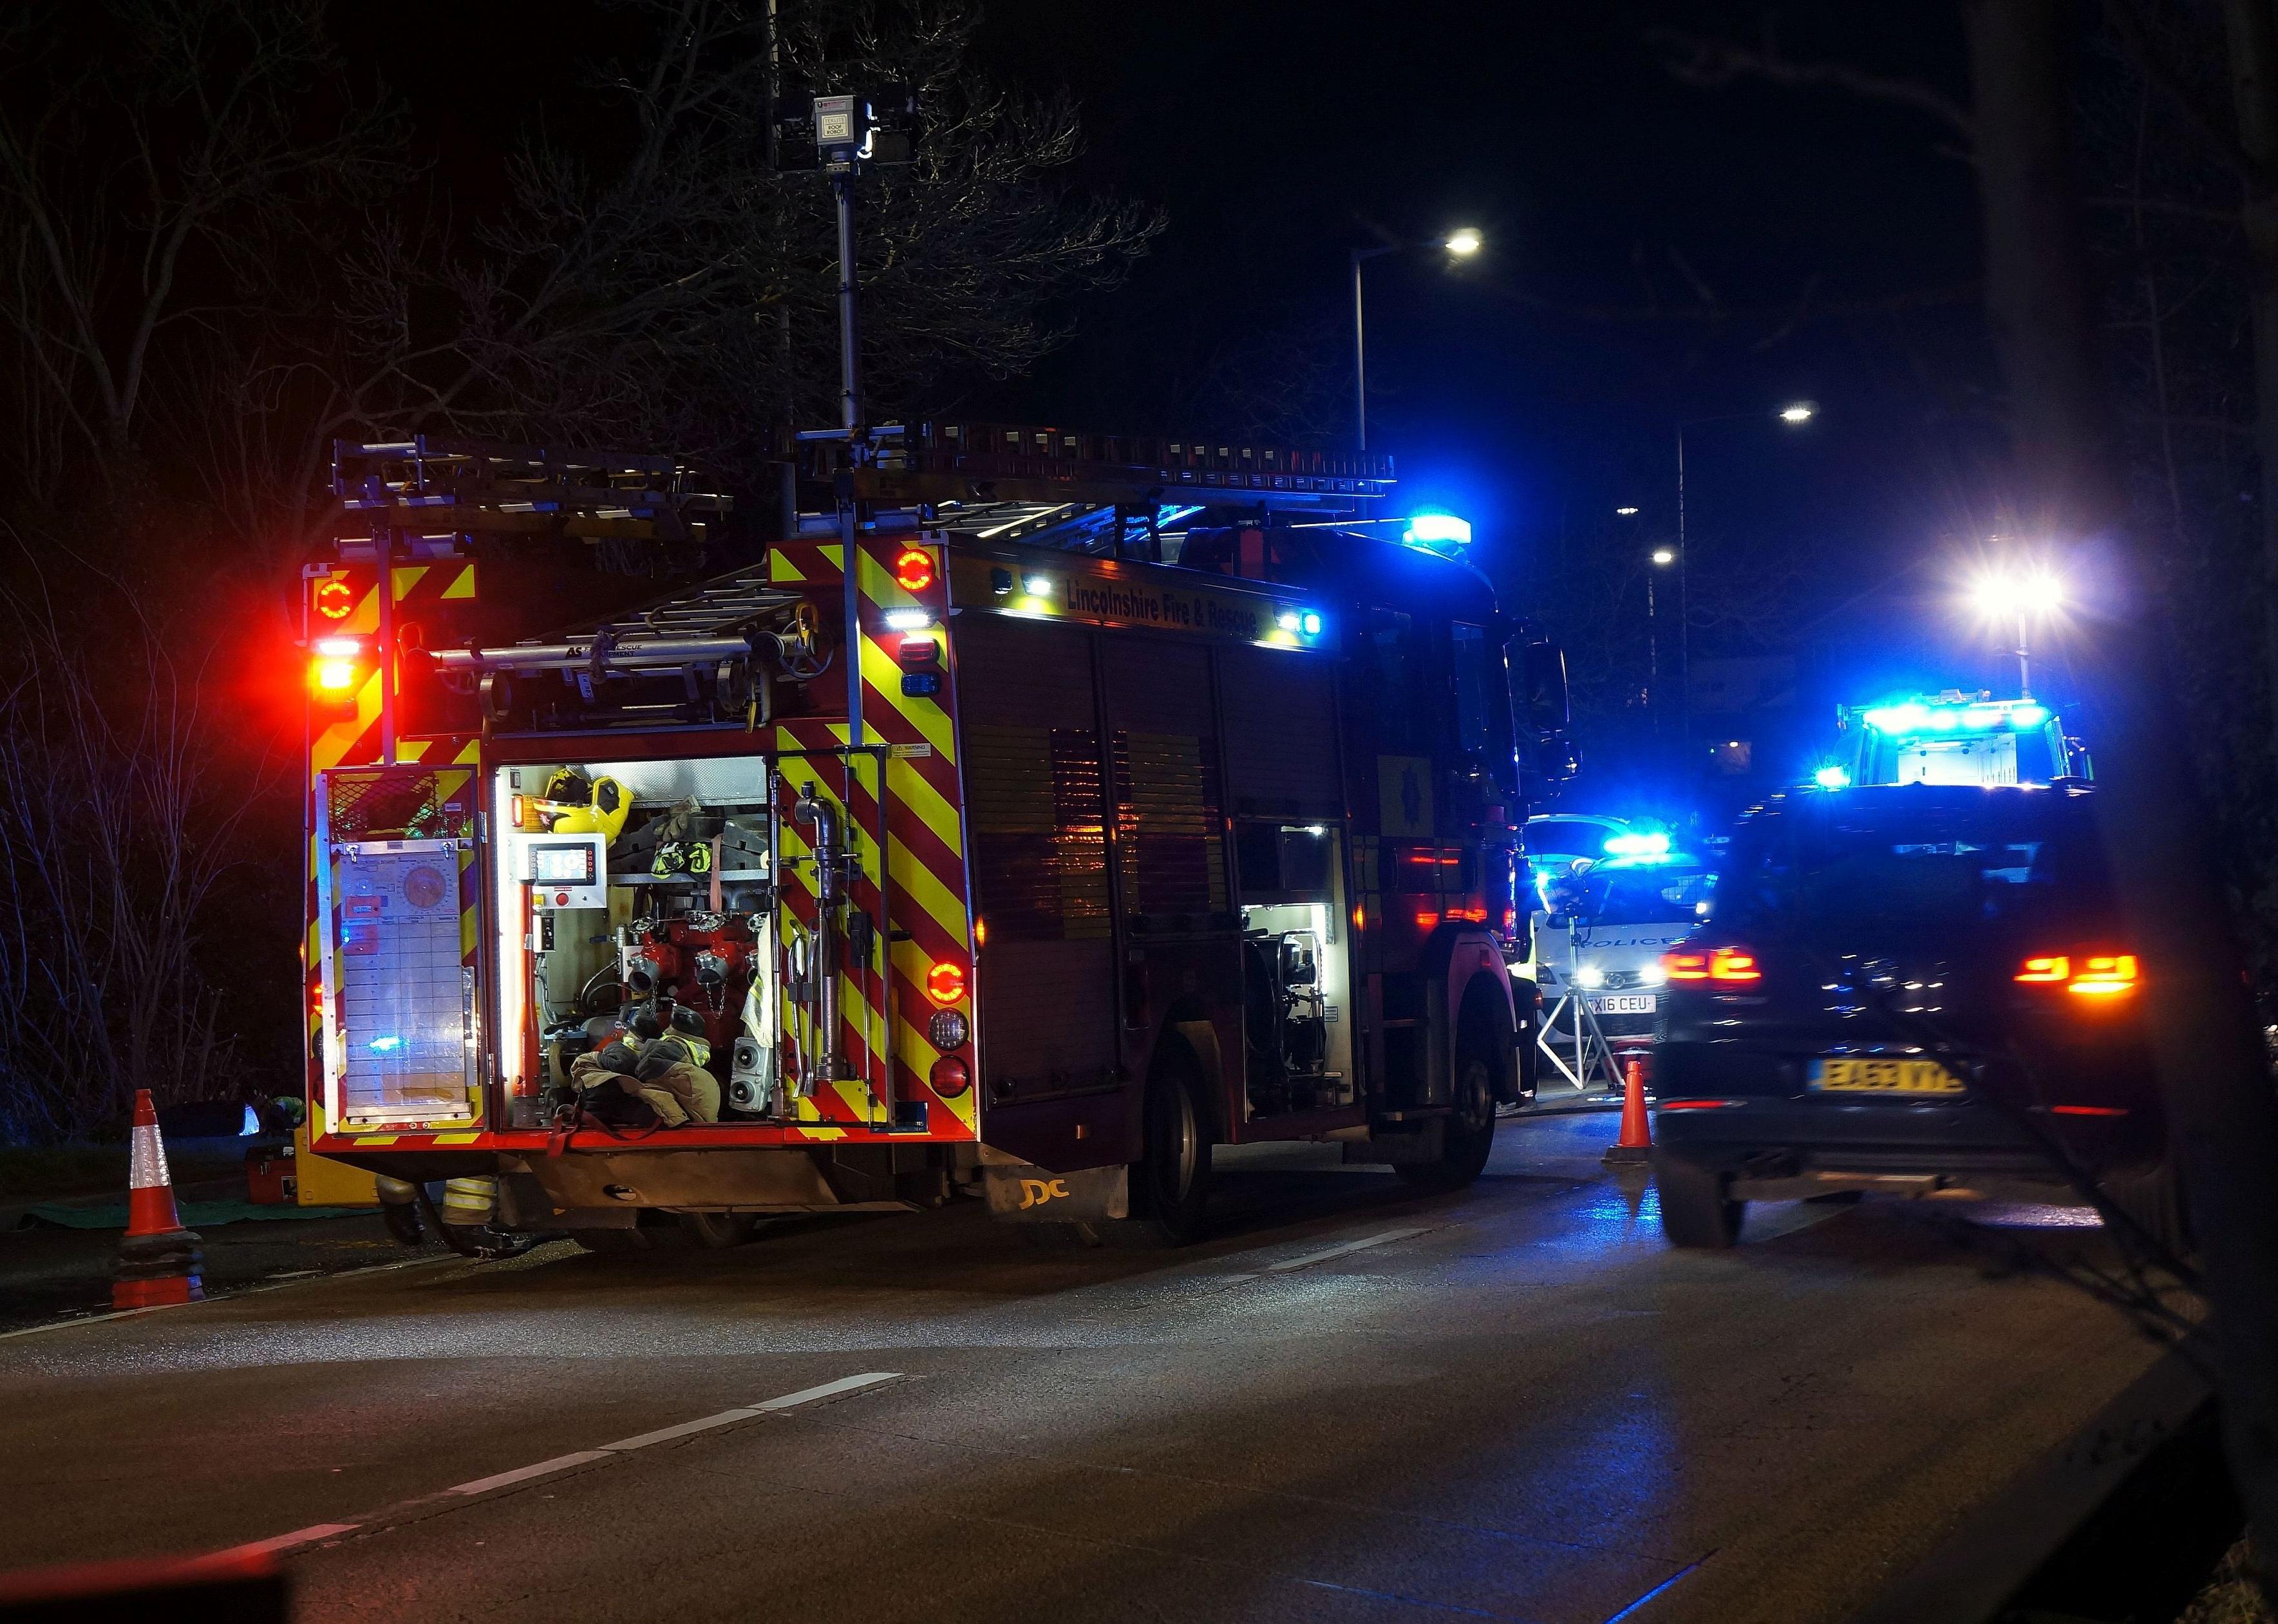 Scene of an accident at night with flashing lights from emergency vehicles.